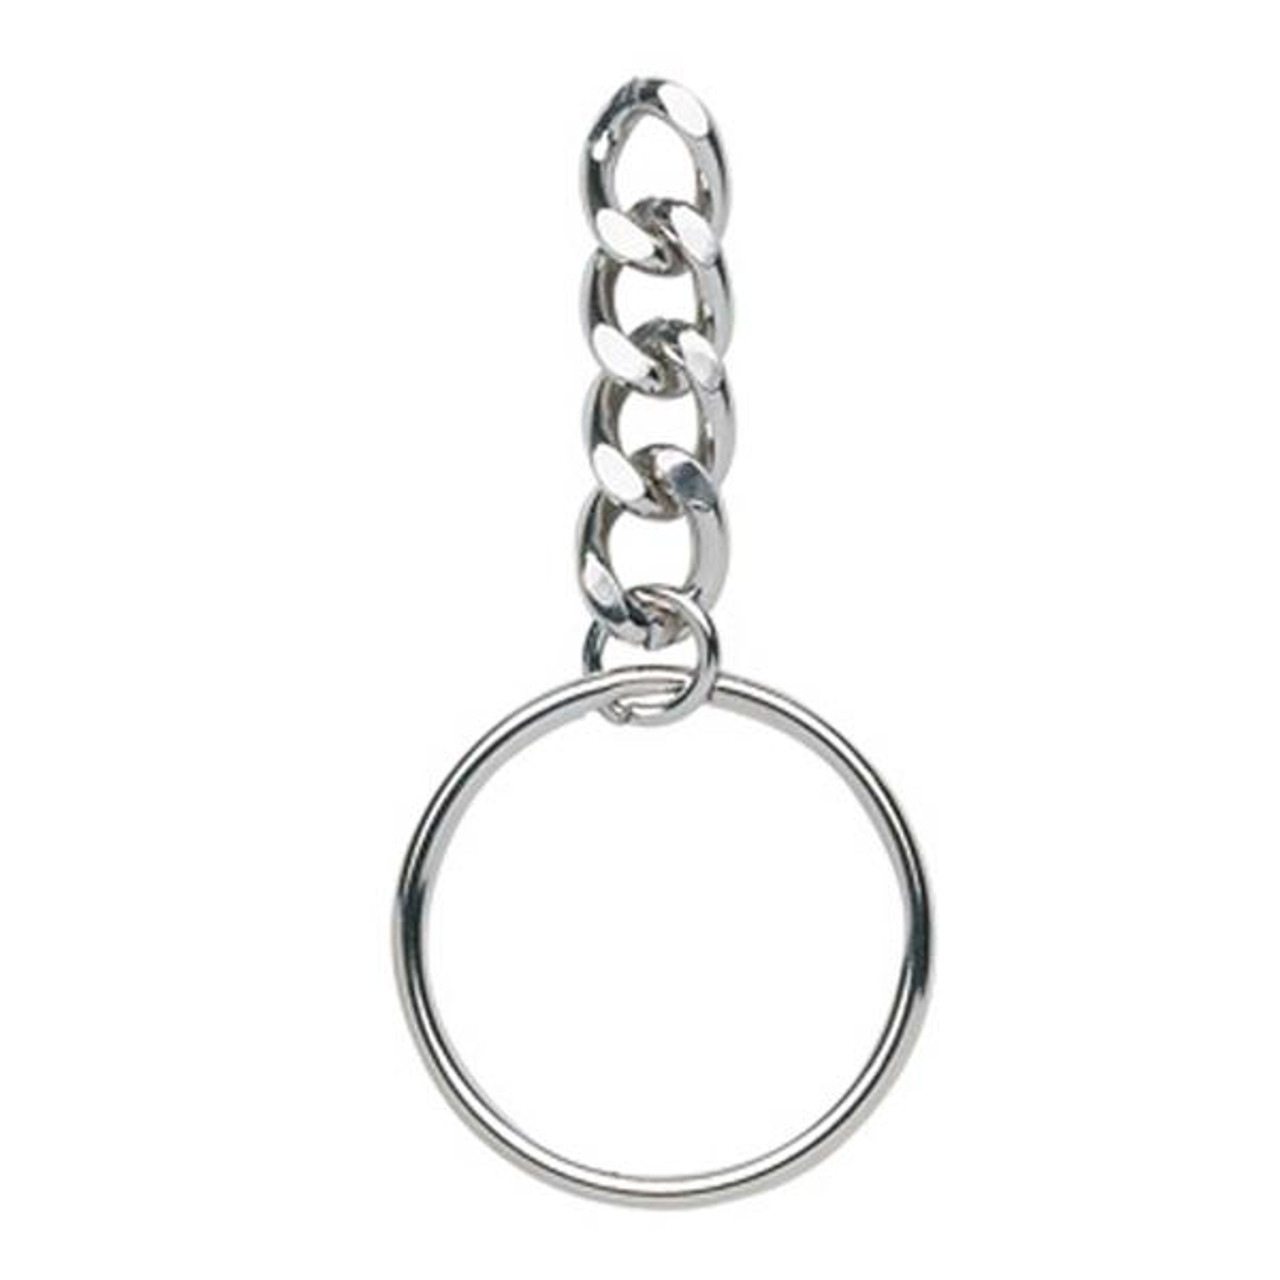 Shop for and Buy 32mm Split Keyring with Heavy Curb Chain Assembly at  . Large selection and bulk discounts available.